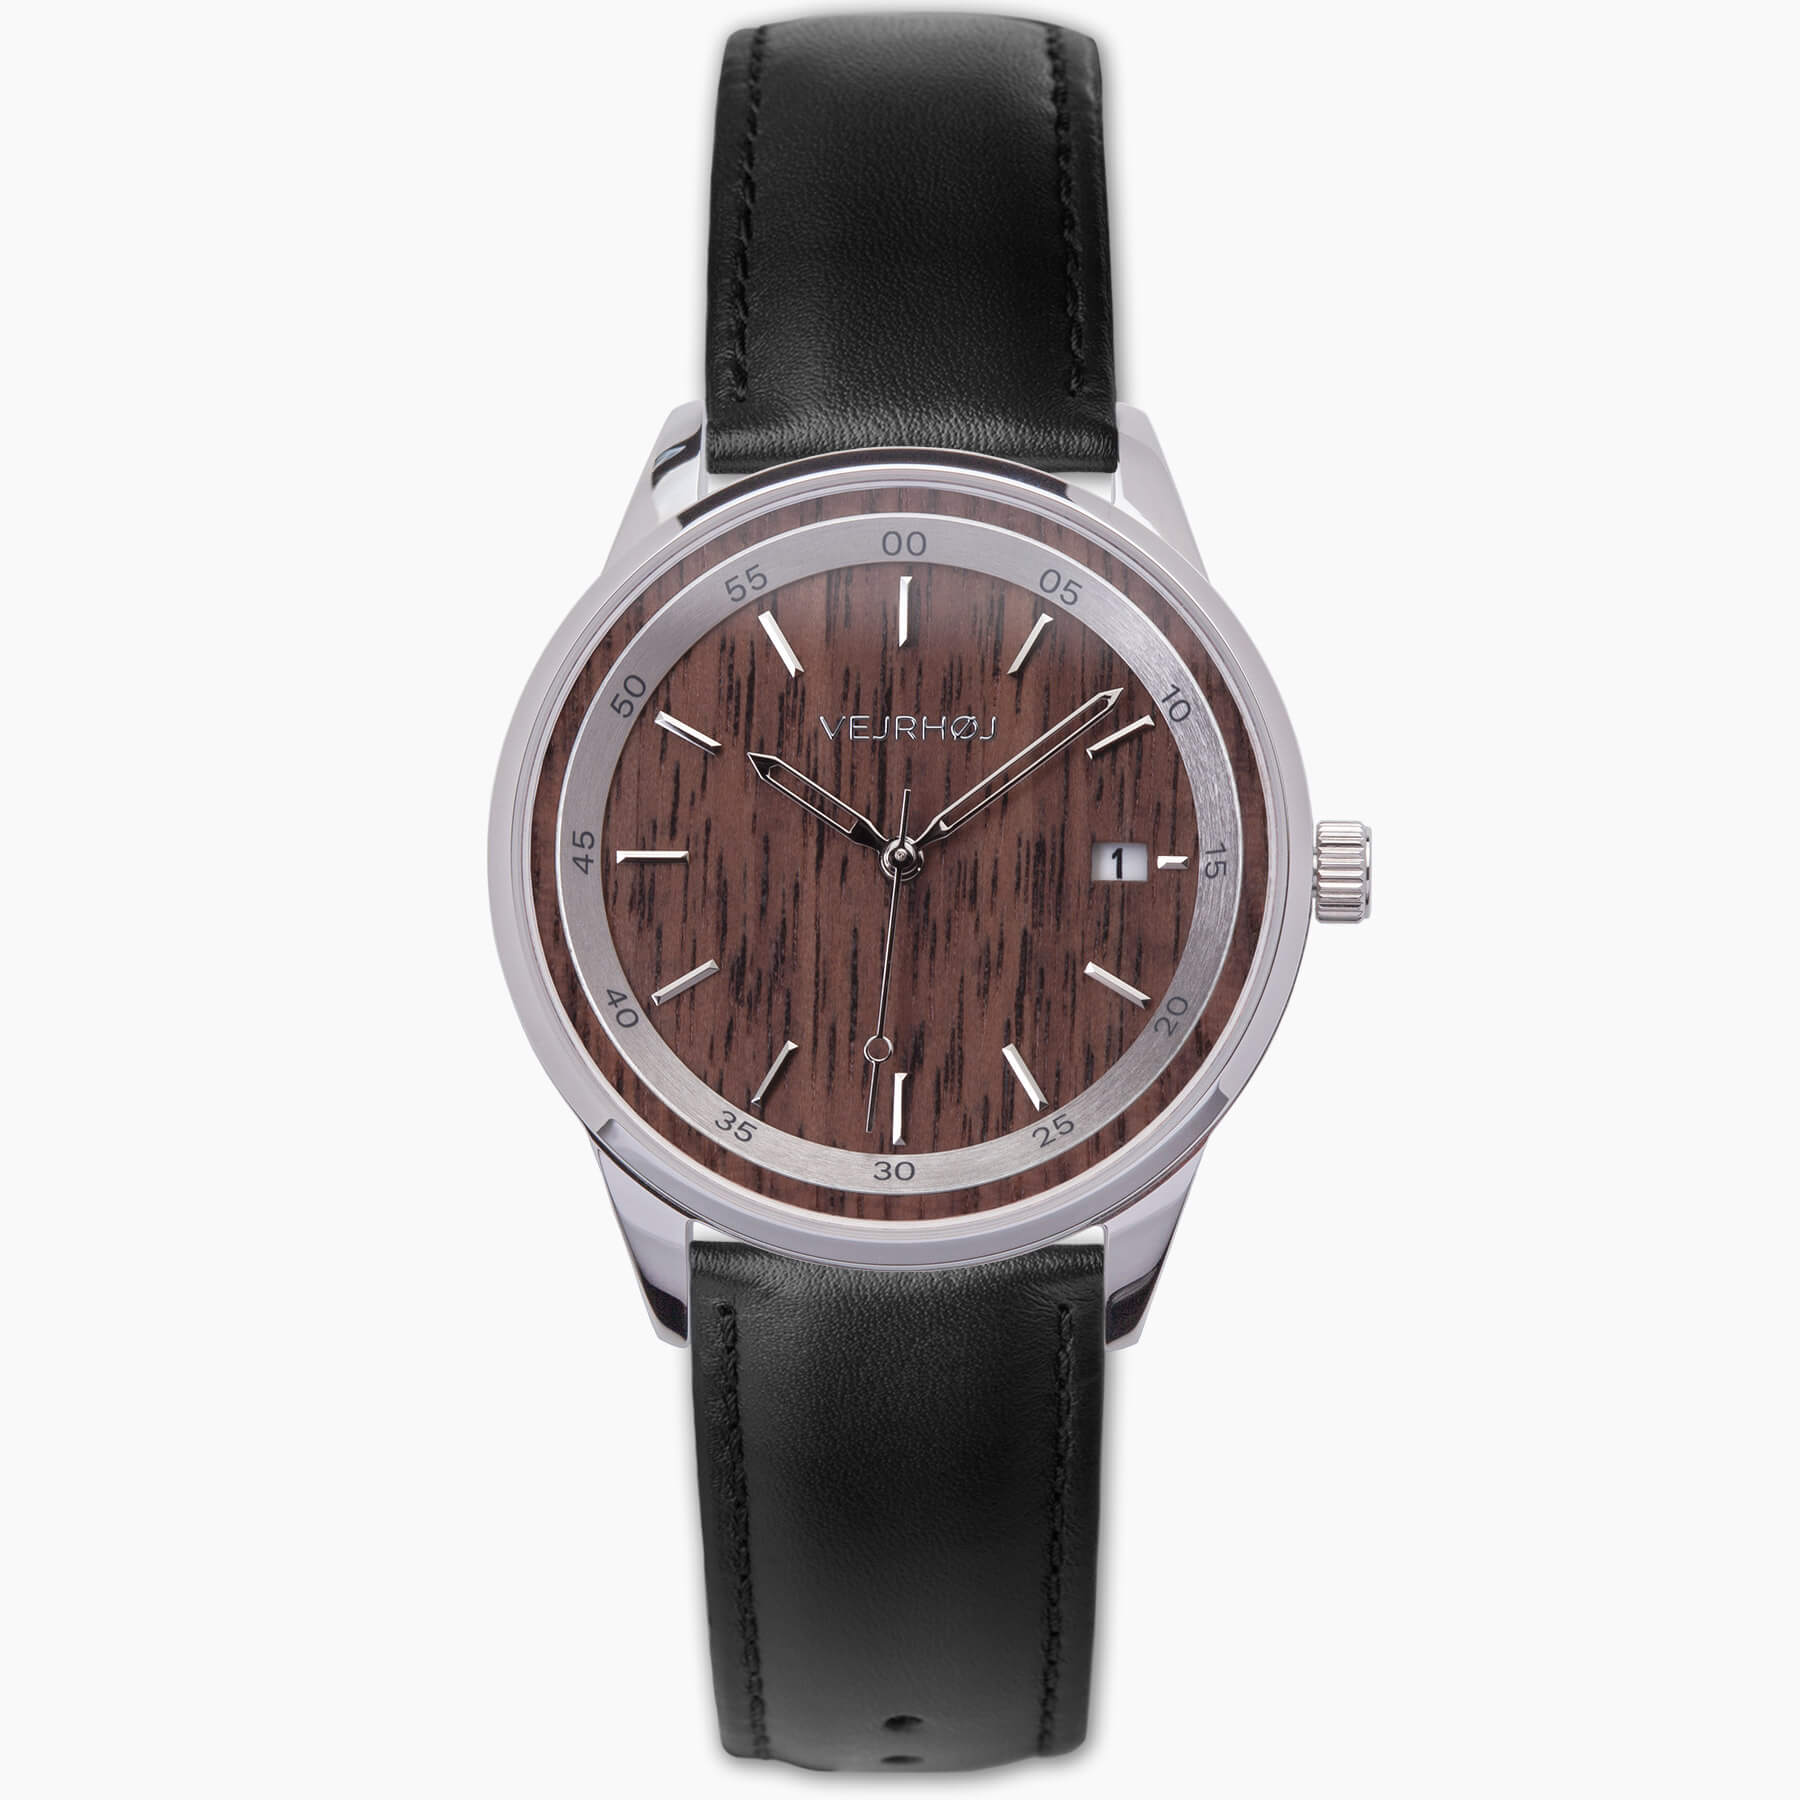 Brown automatic wrist watch with black straps and a dial of natural walnut wood with silver hands